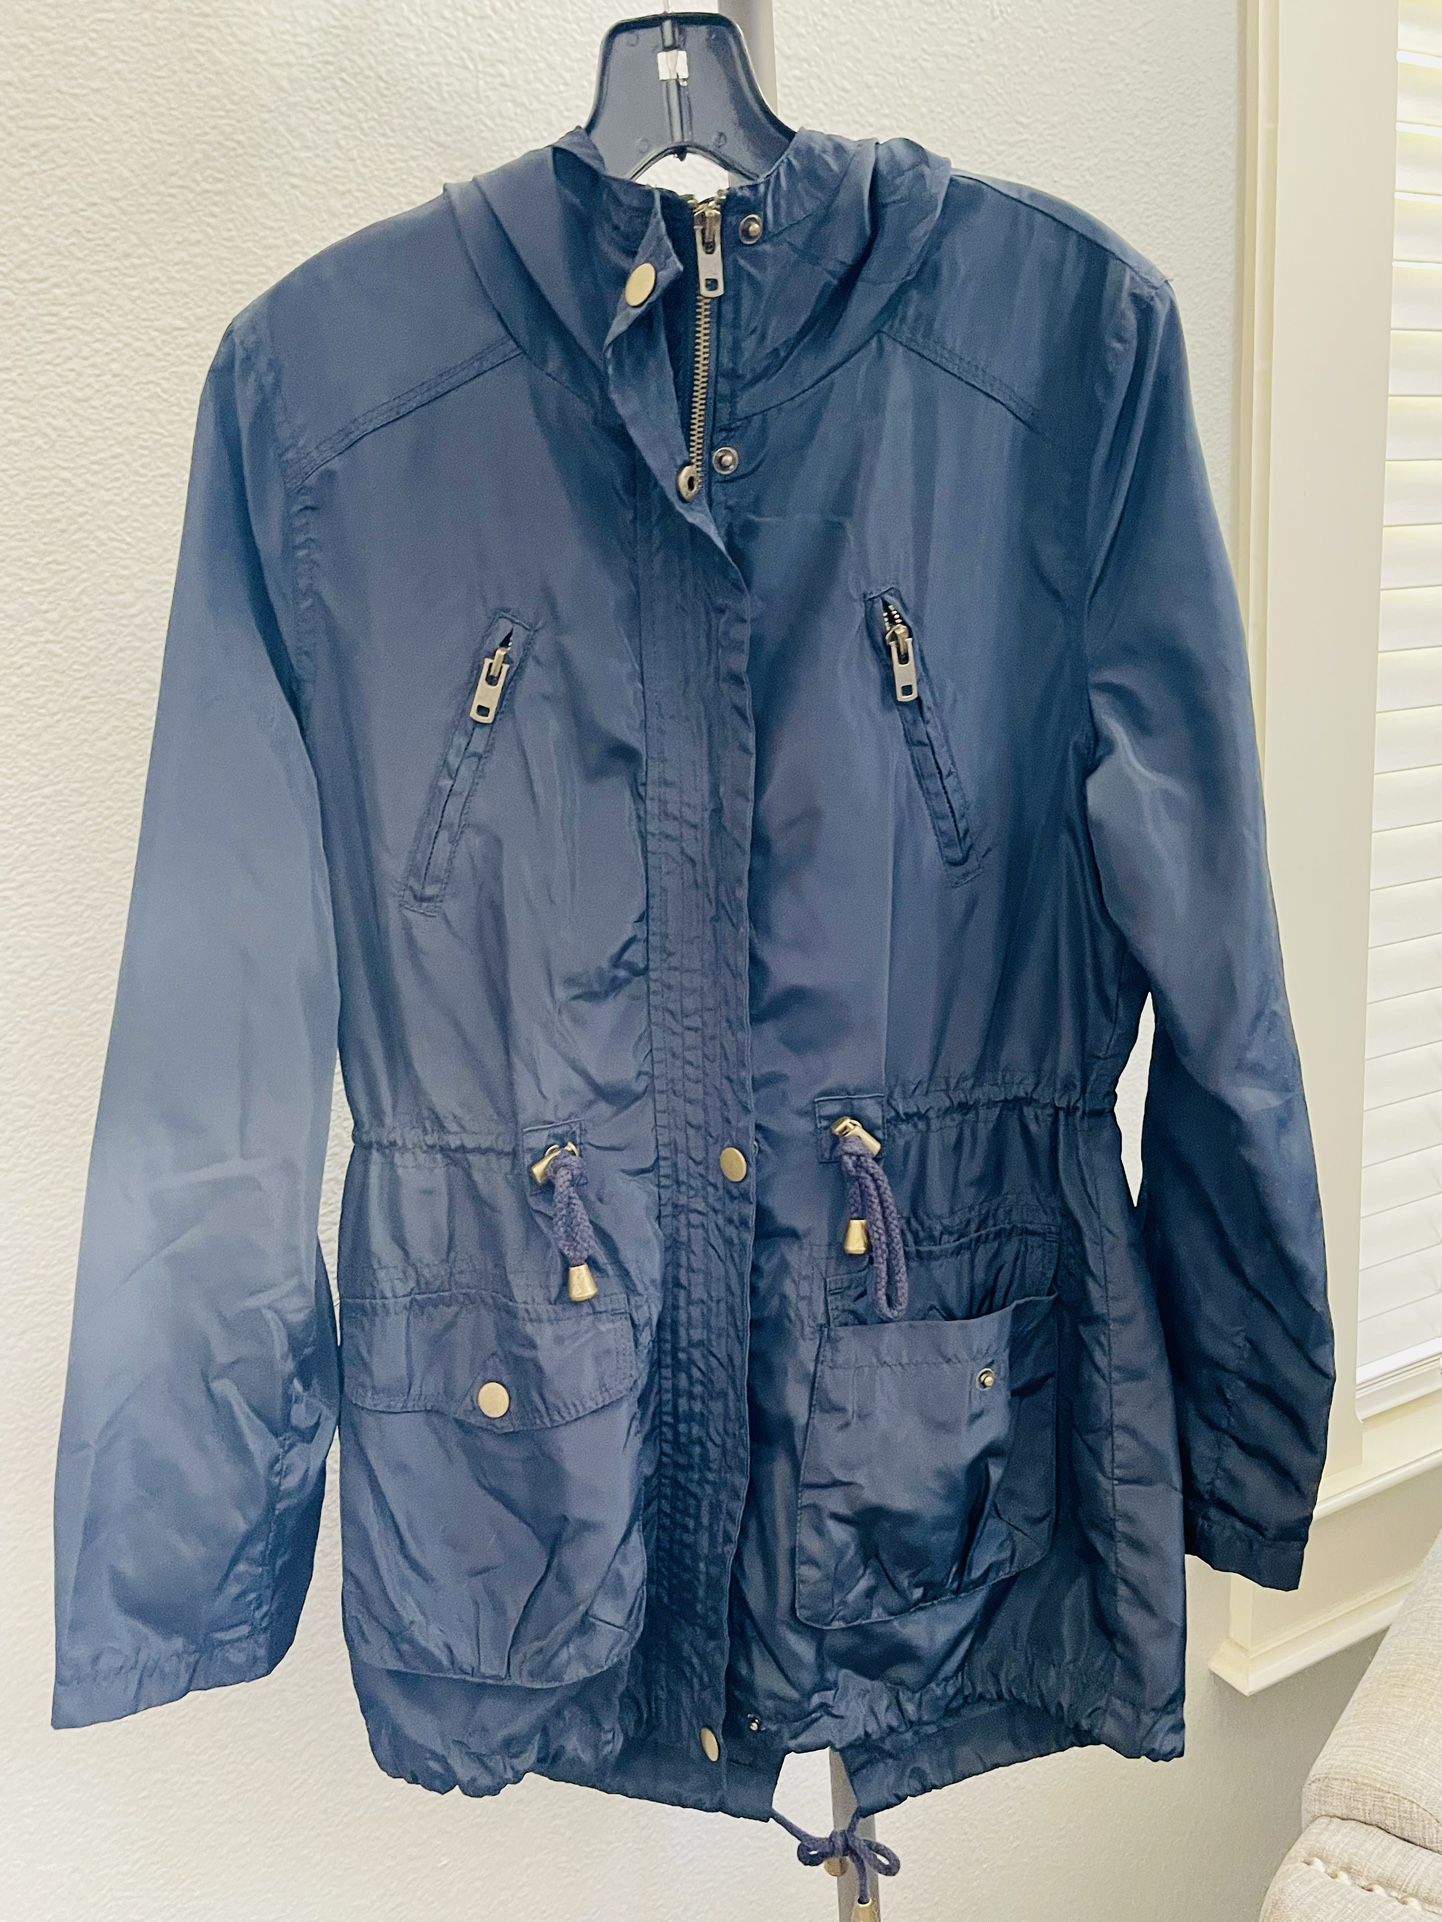 Forever 21 Navy Blue Rain Jacket with Gray Hood